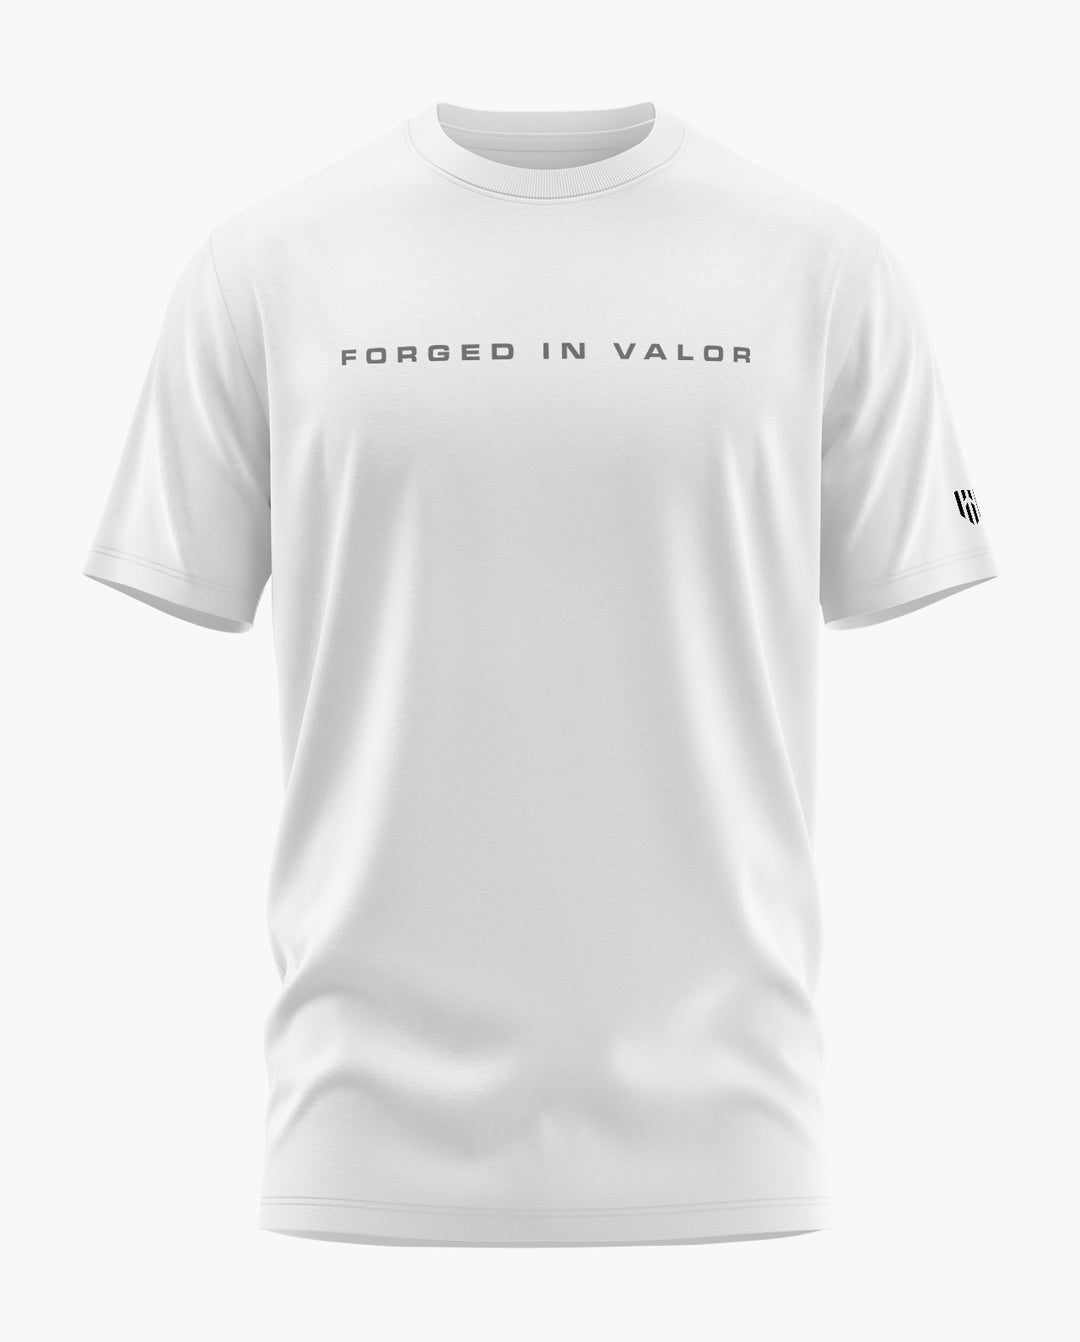 FORGED IN VALOR T-Shirt